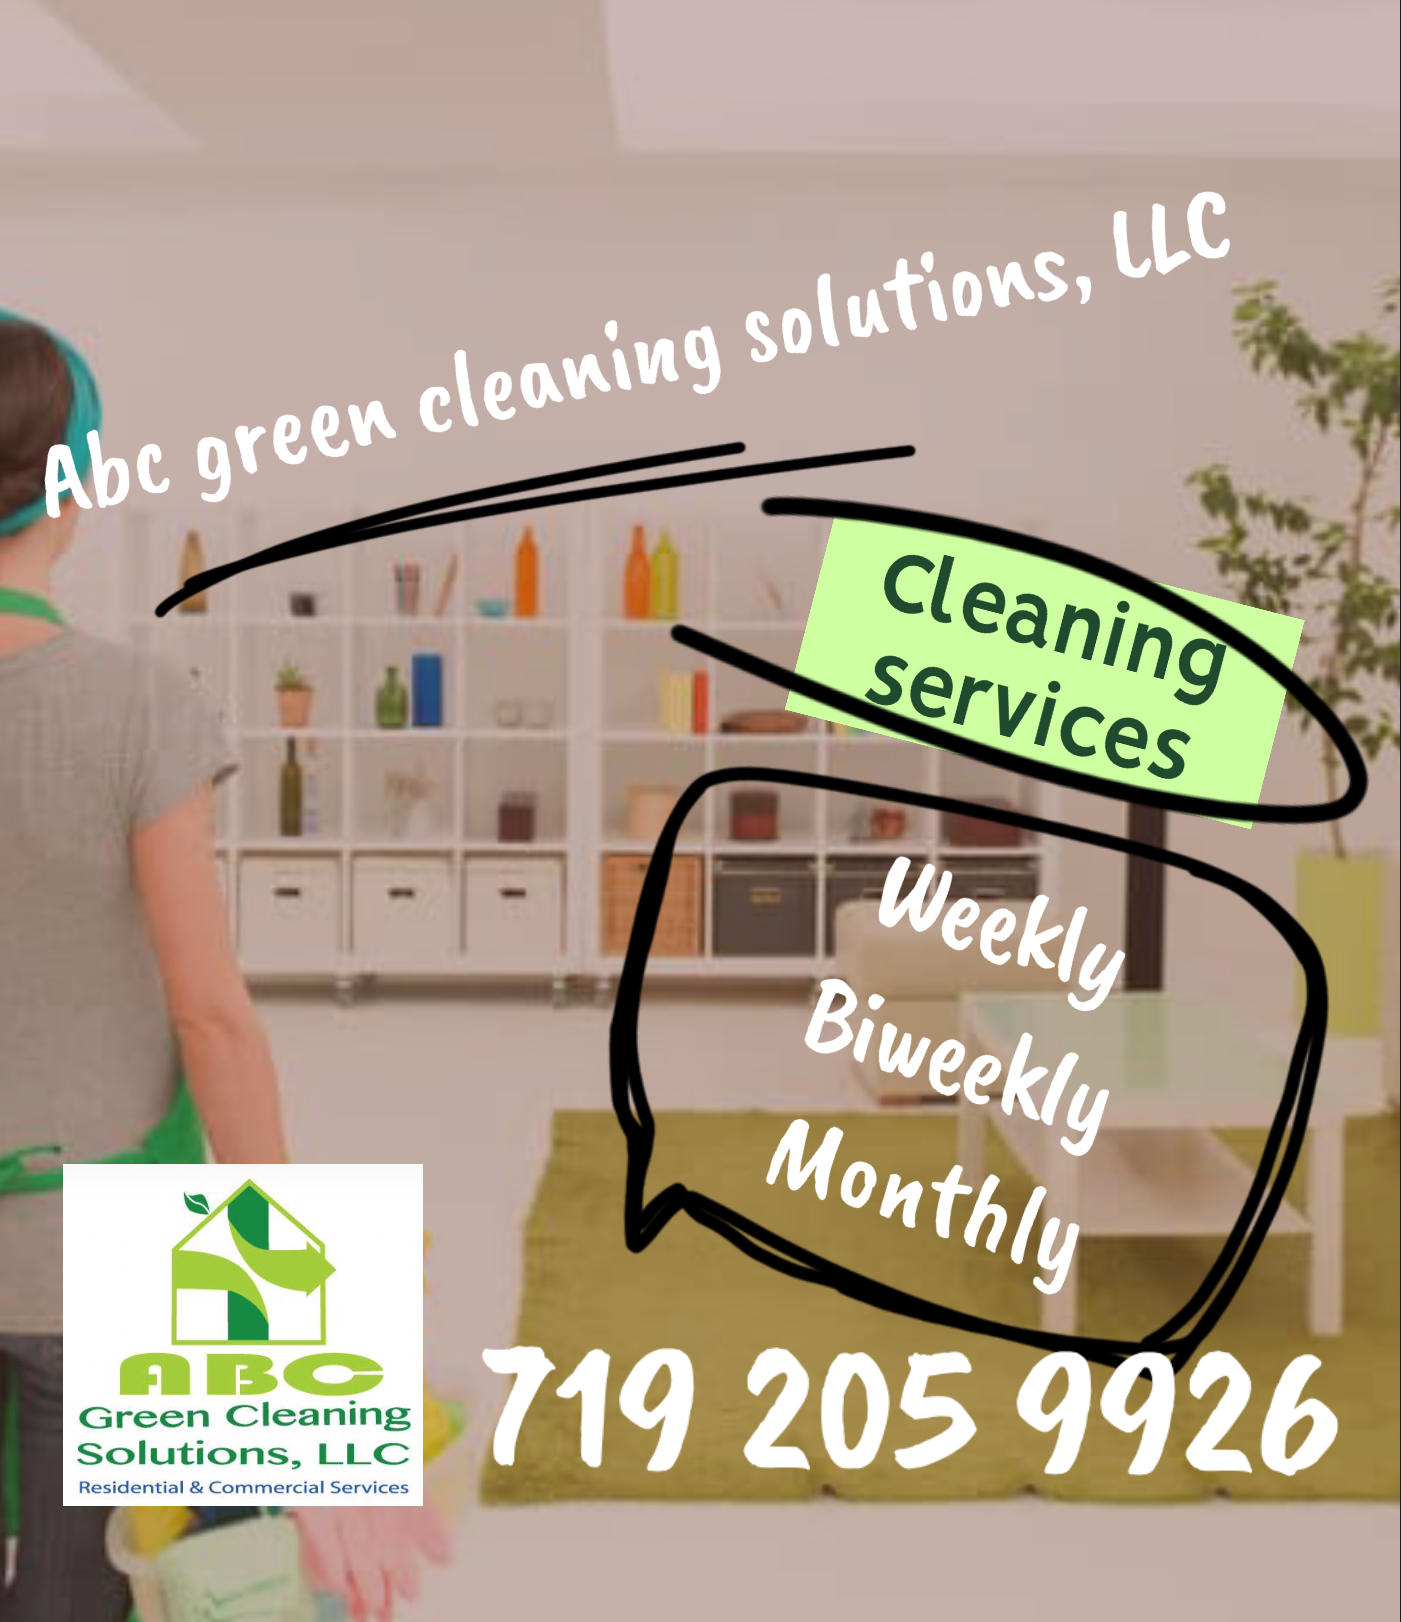 ABC Green Cleaning Solutions